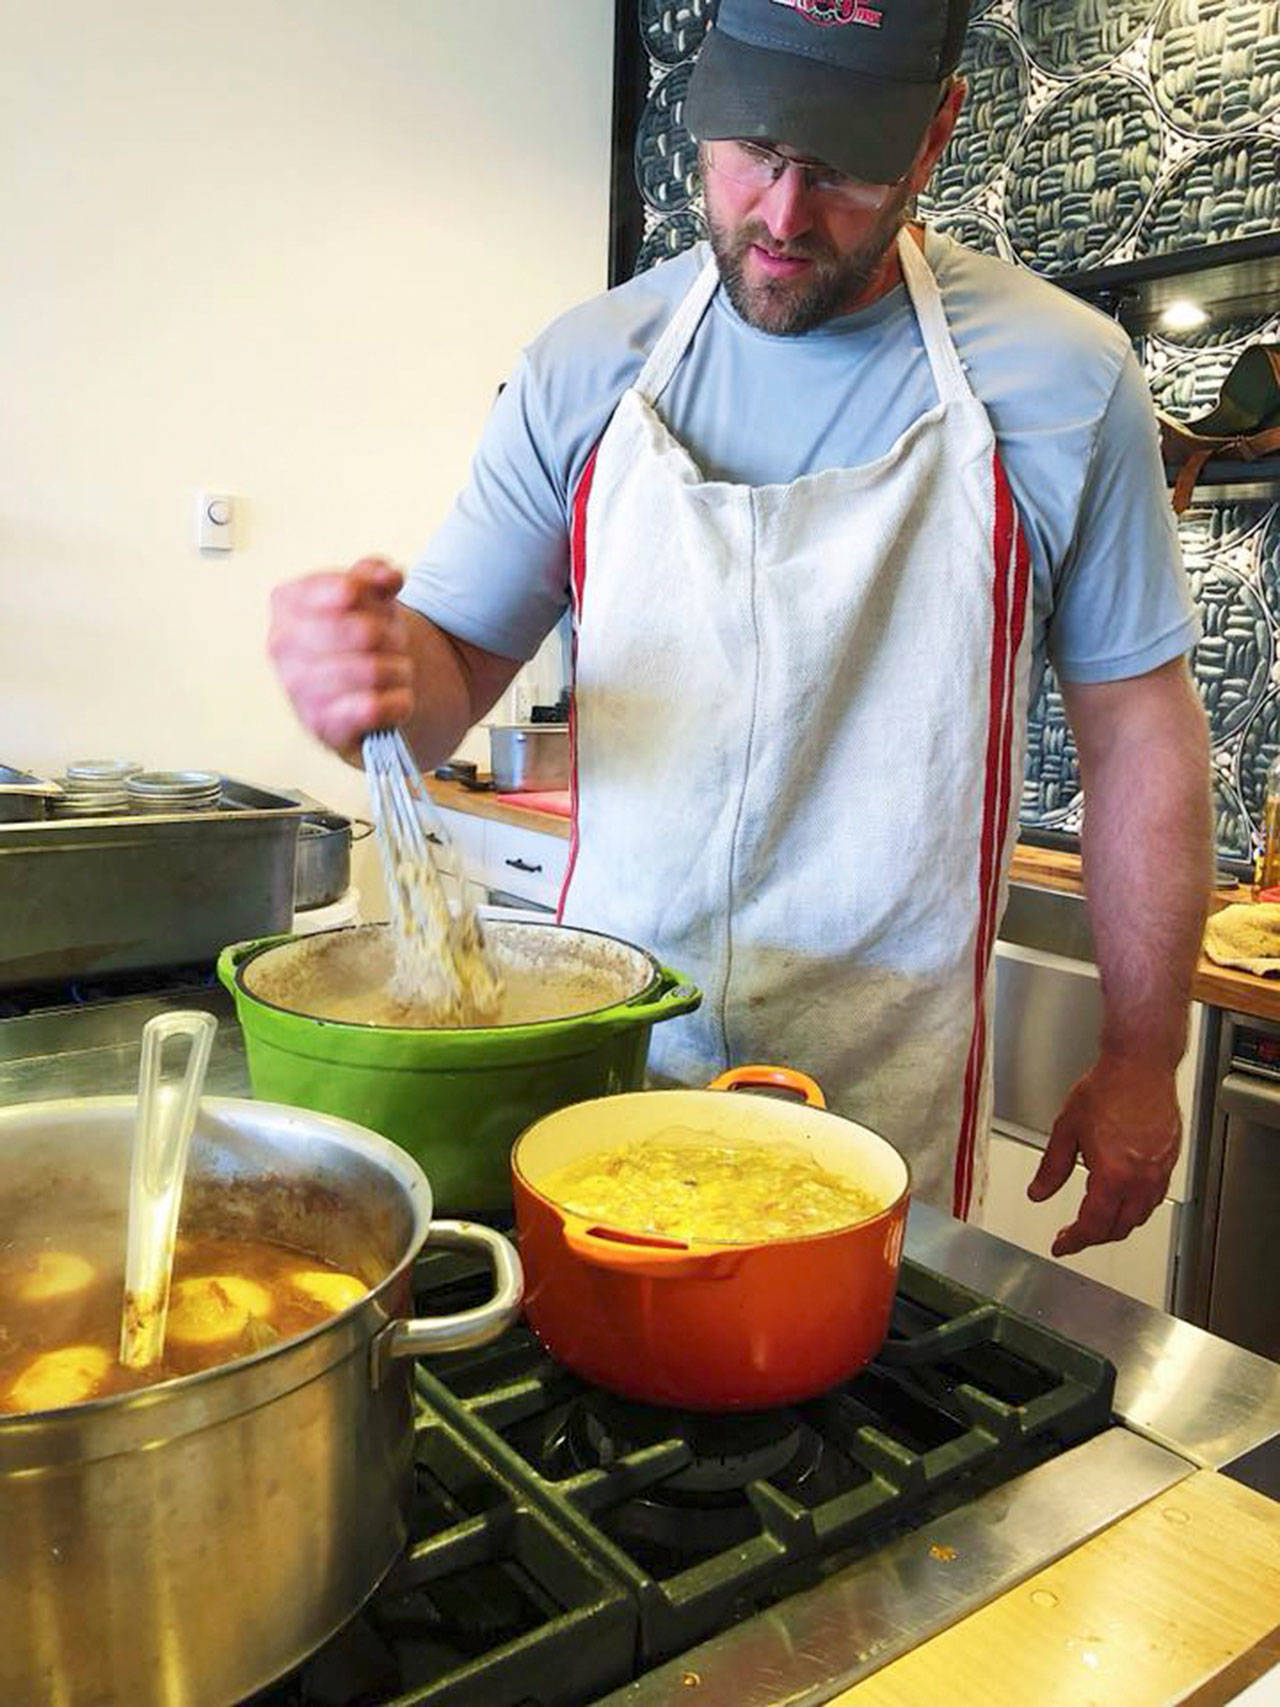 Pink Tractor Farm’s Dave Hatfield cooks a Palouse Winery dinner at Relish. (Shauna Ahern Photo)